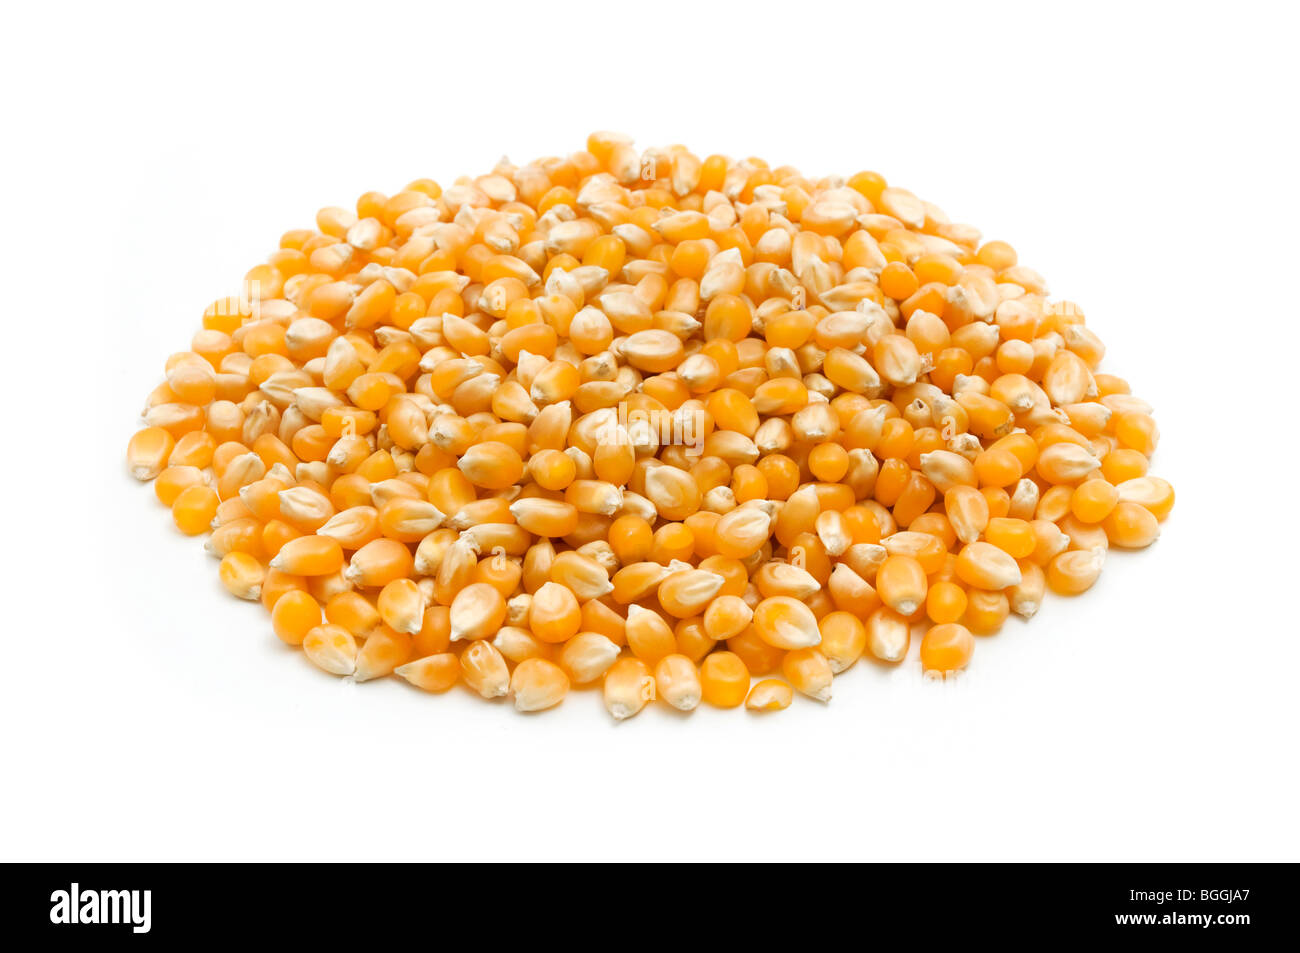 Maize kernels on a white background Stock Photo